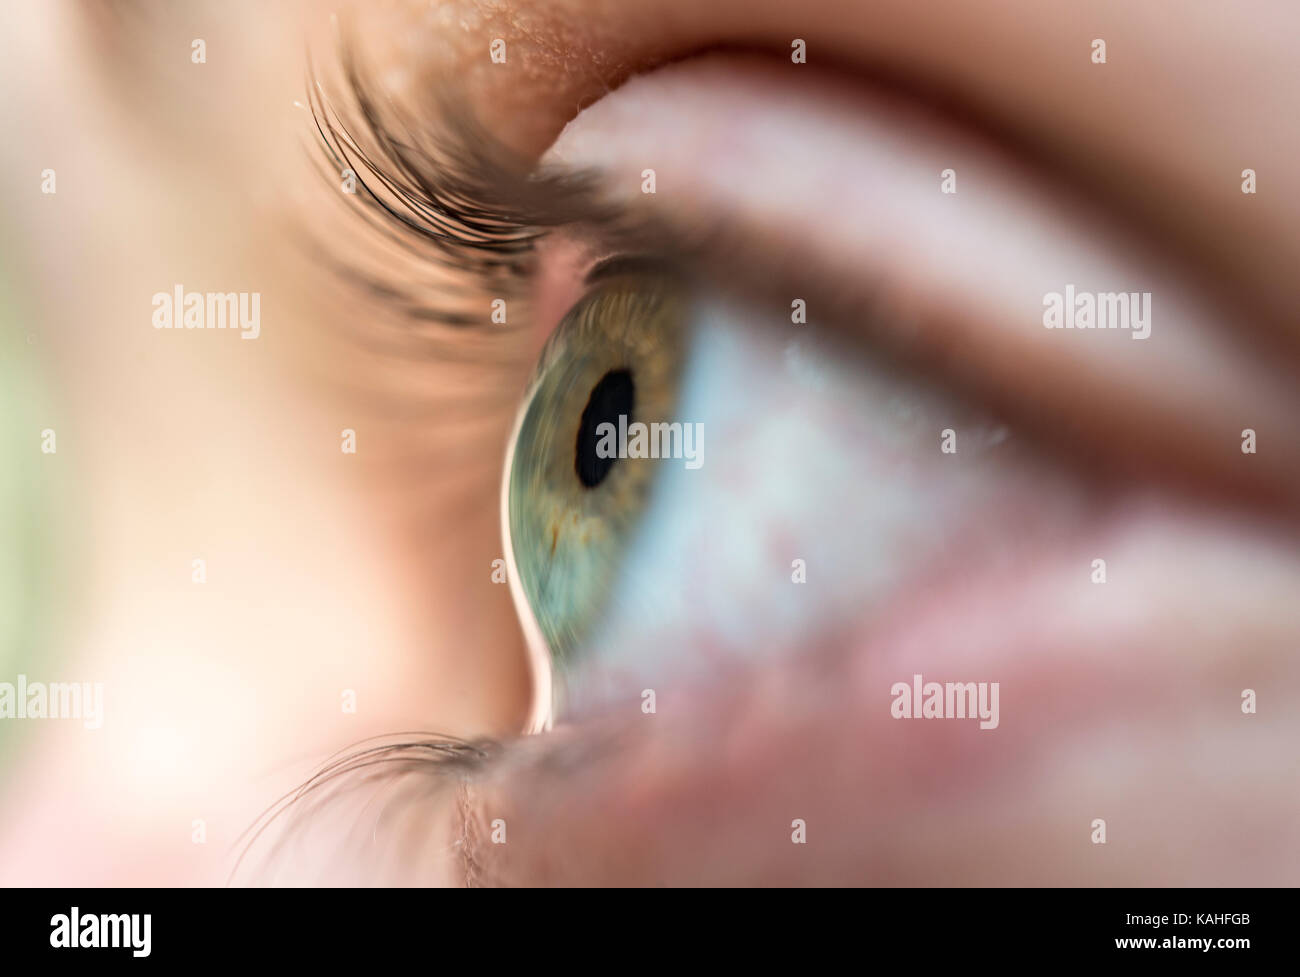 Eye of a woman, close-up Stock Photo